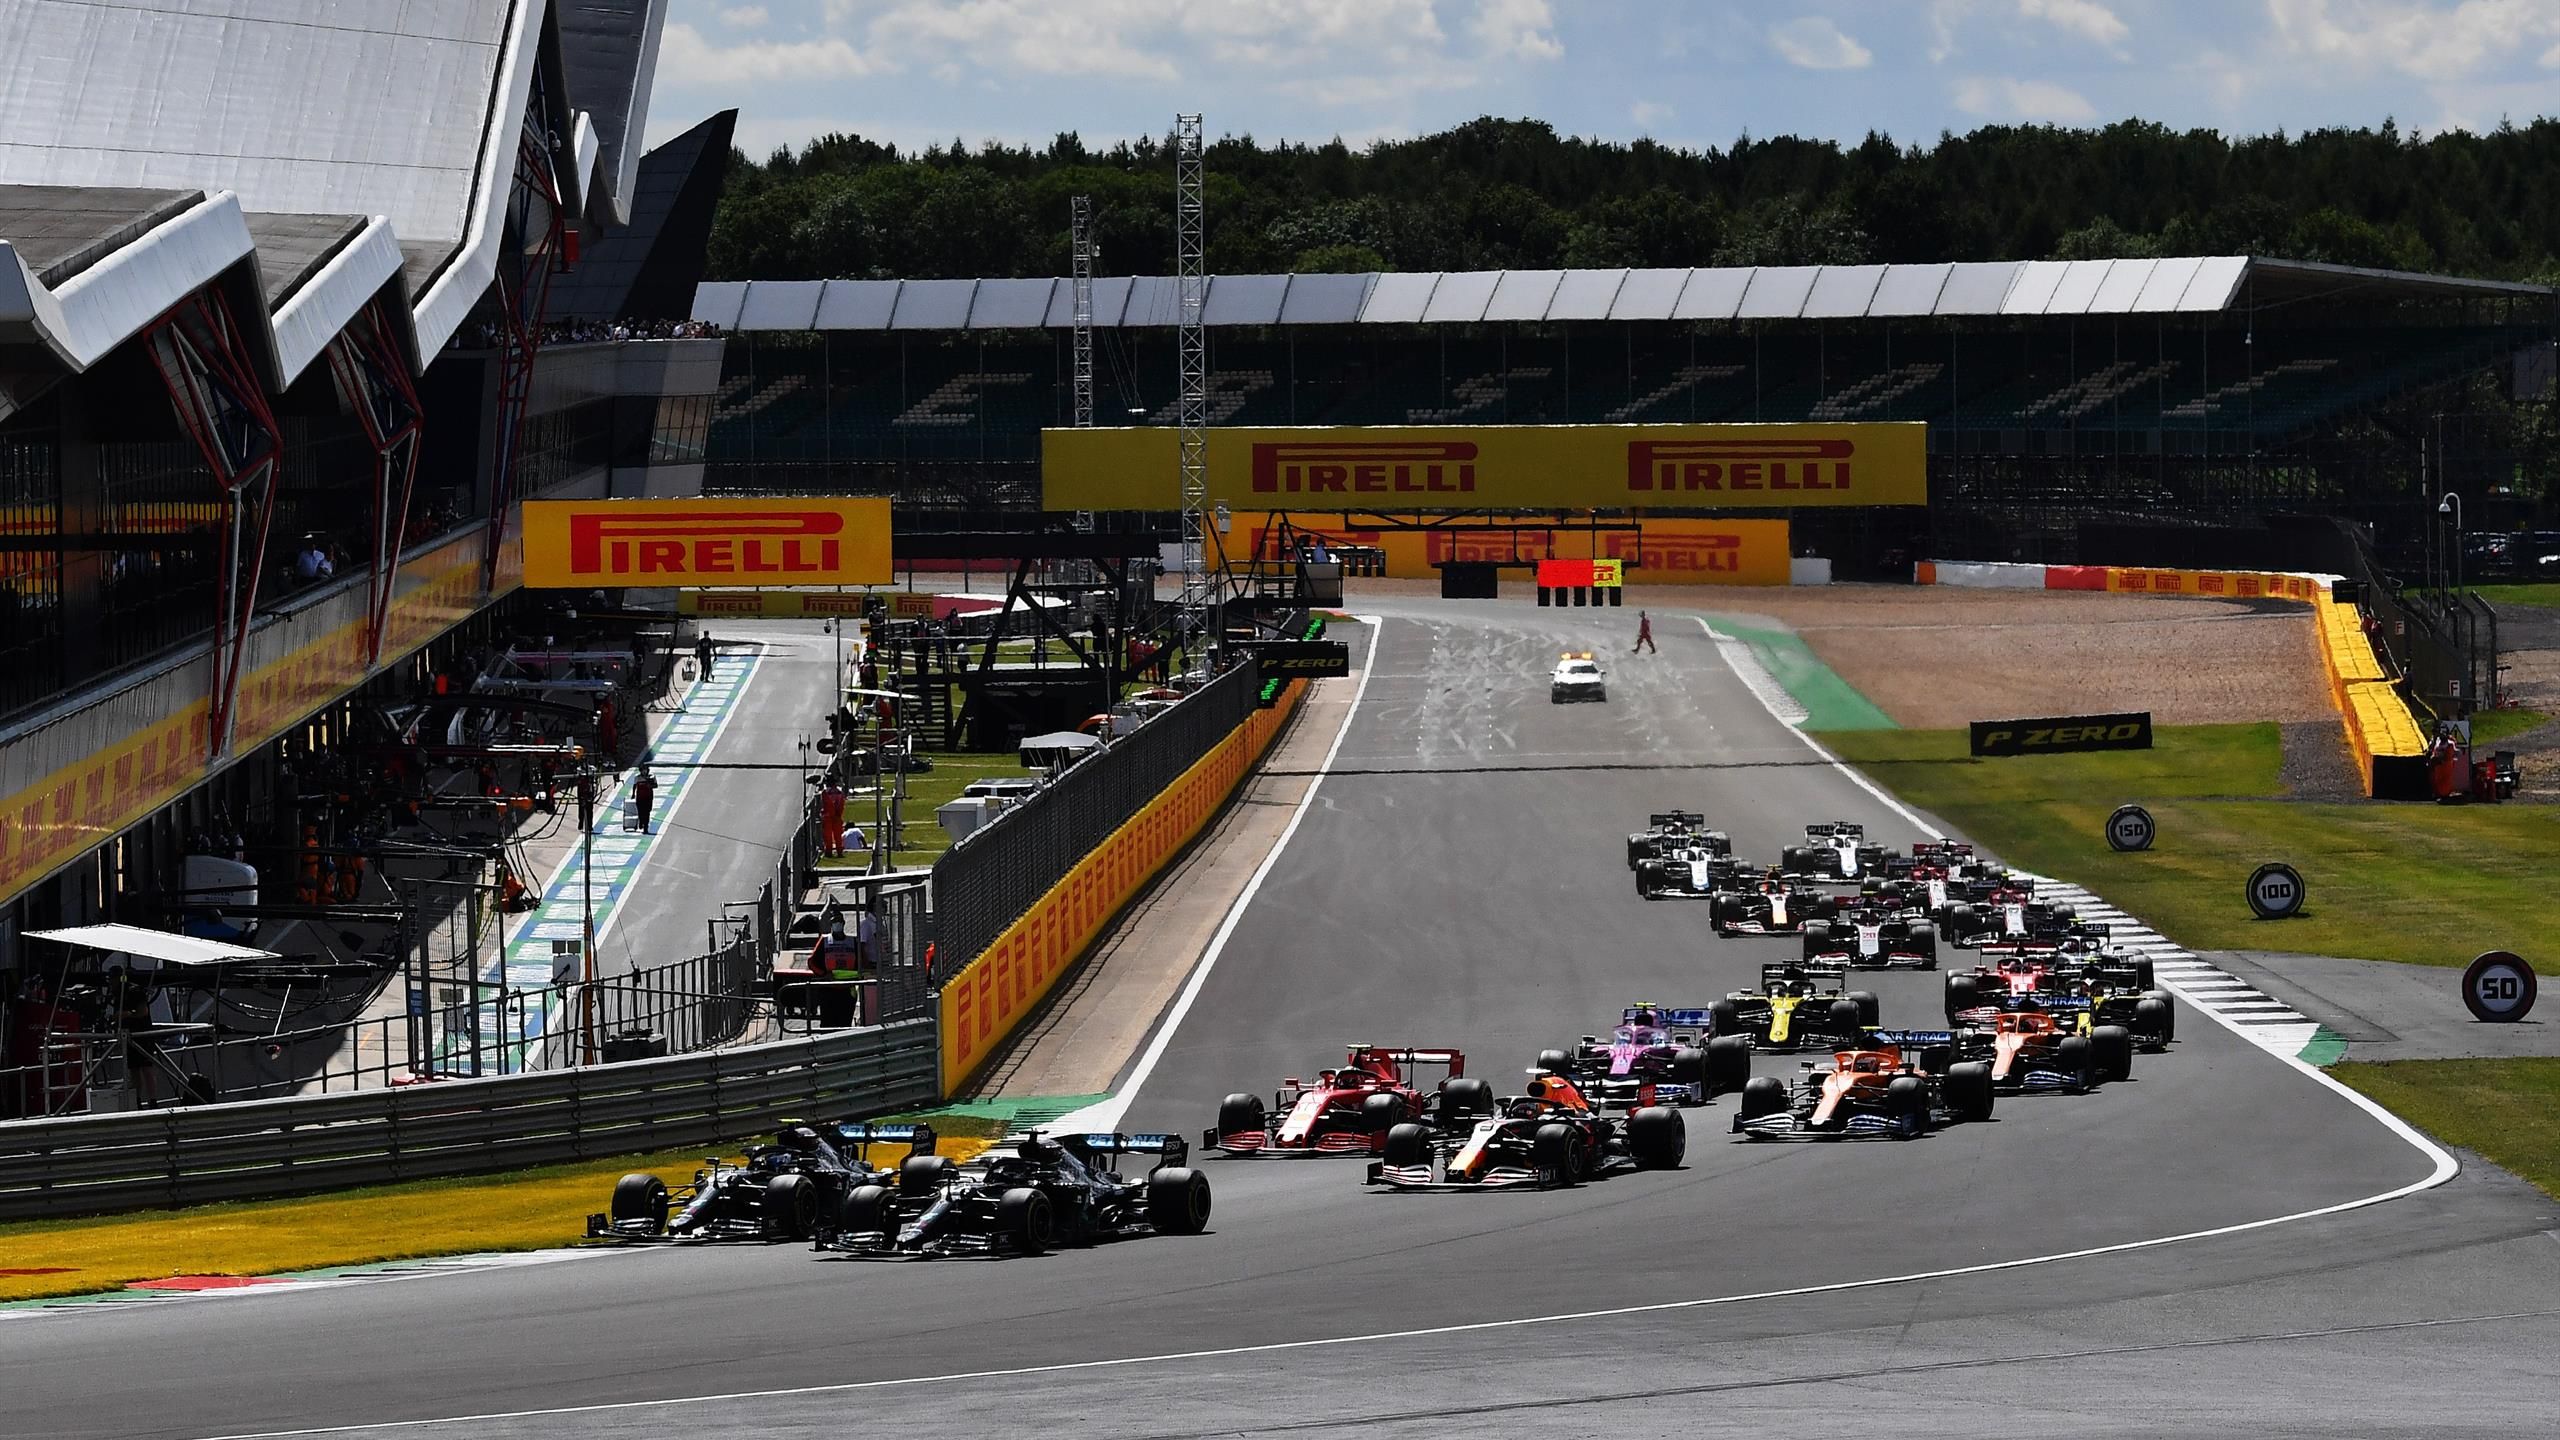 Silverstone will hold an F1 sprint race before the British Grand Prix, says the sports CEO